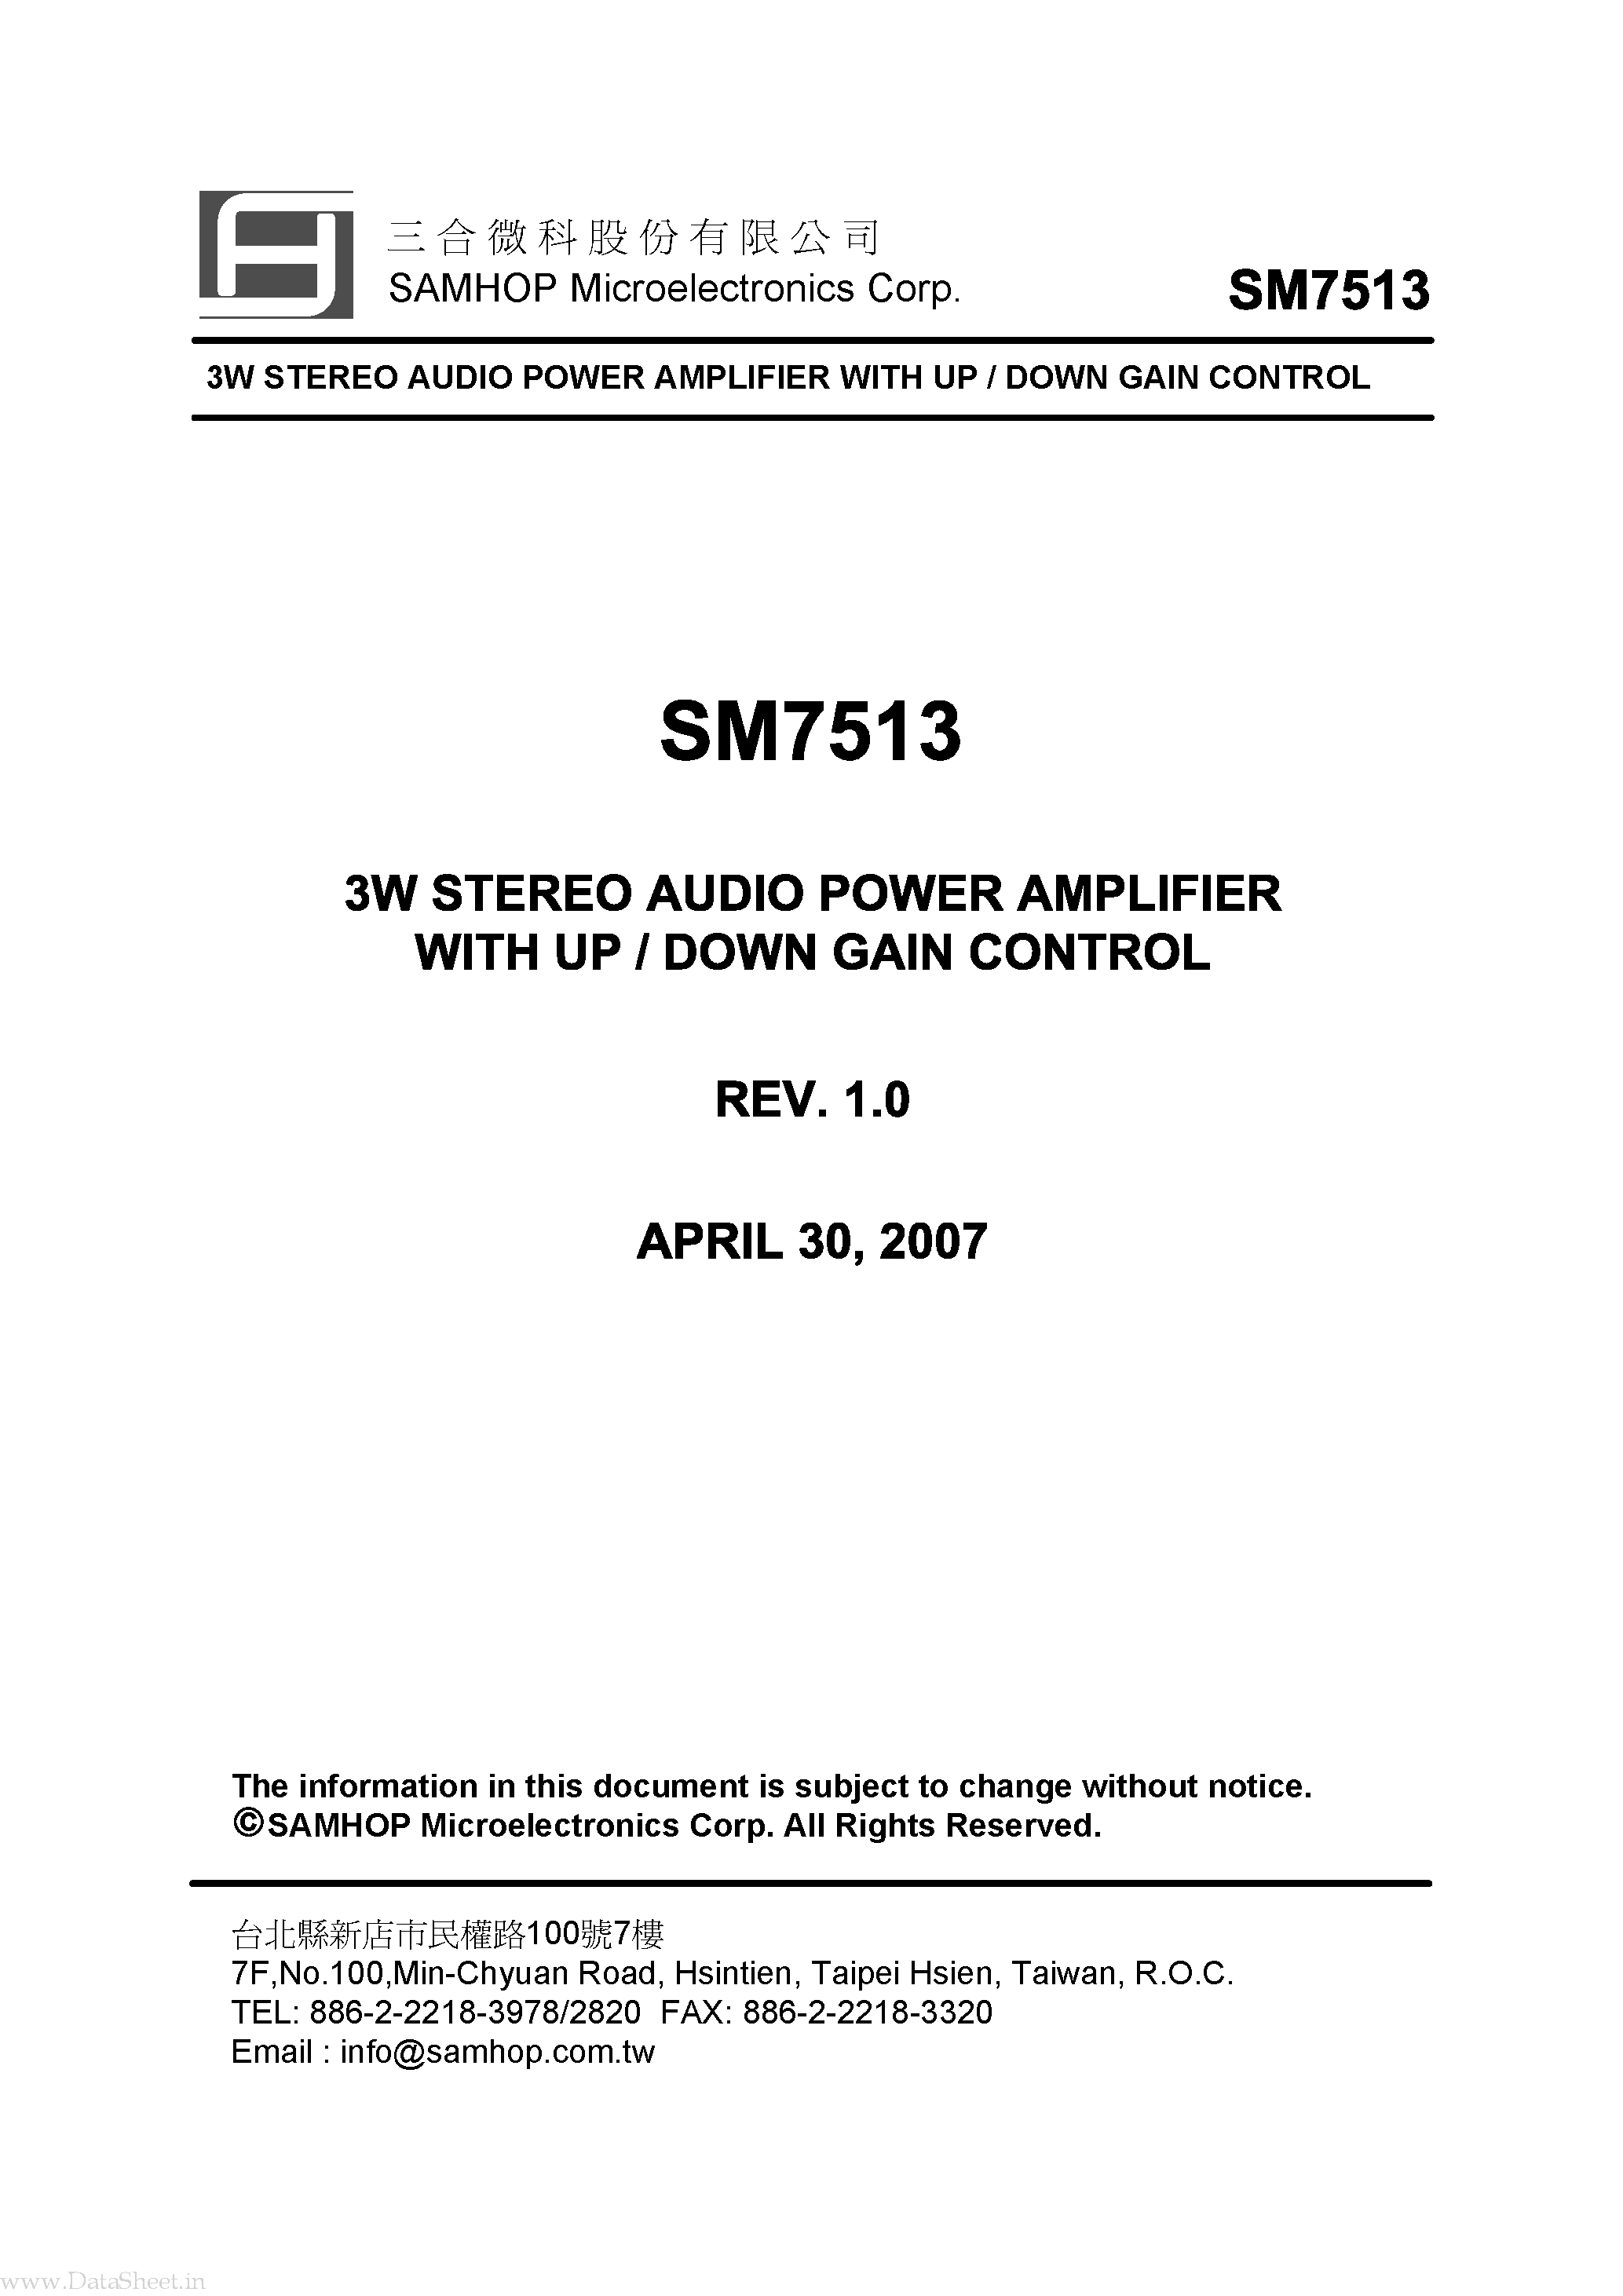 Datasheet SM7513 - 3W STEREO AUDIO POWER AMPLIFIER page 1